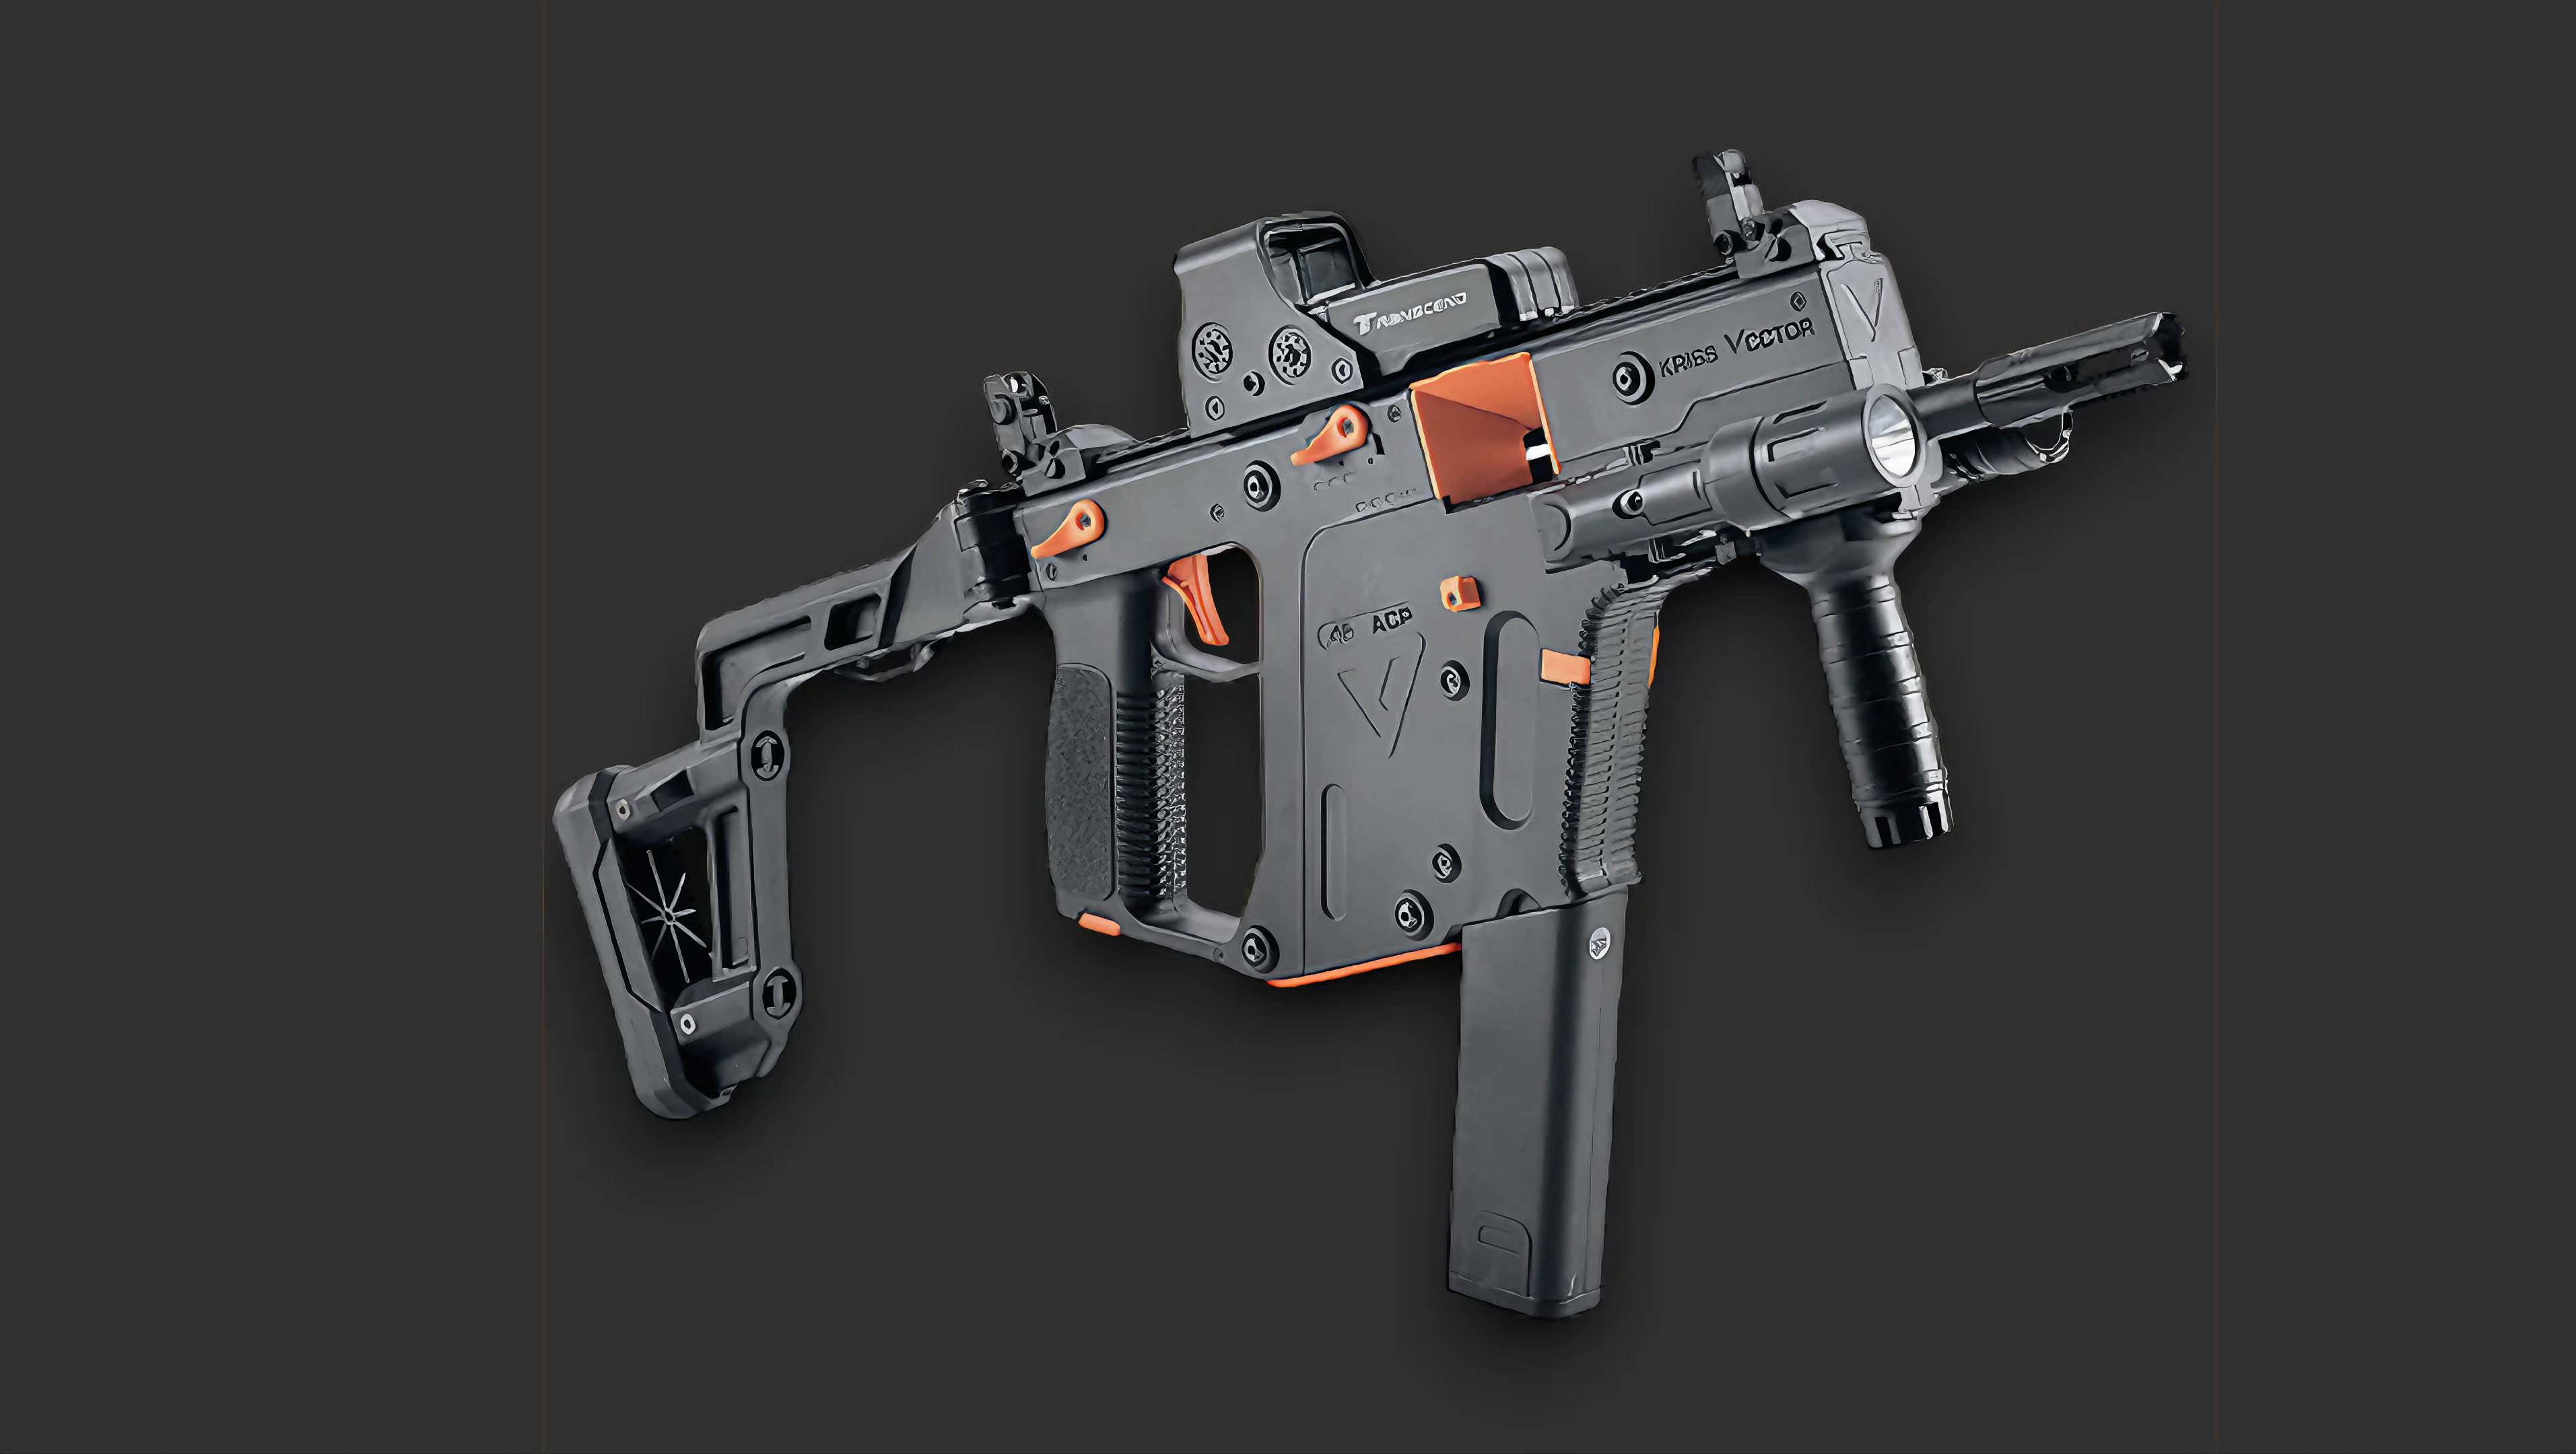 <img src="kriss-vector-gel-blaster-black-orange-accents.jpg" alt="Kriss Vector gel blaster in black with orange accents, a stylish and tactical option for gel blaster enthusiasts">